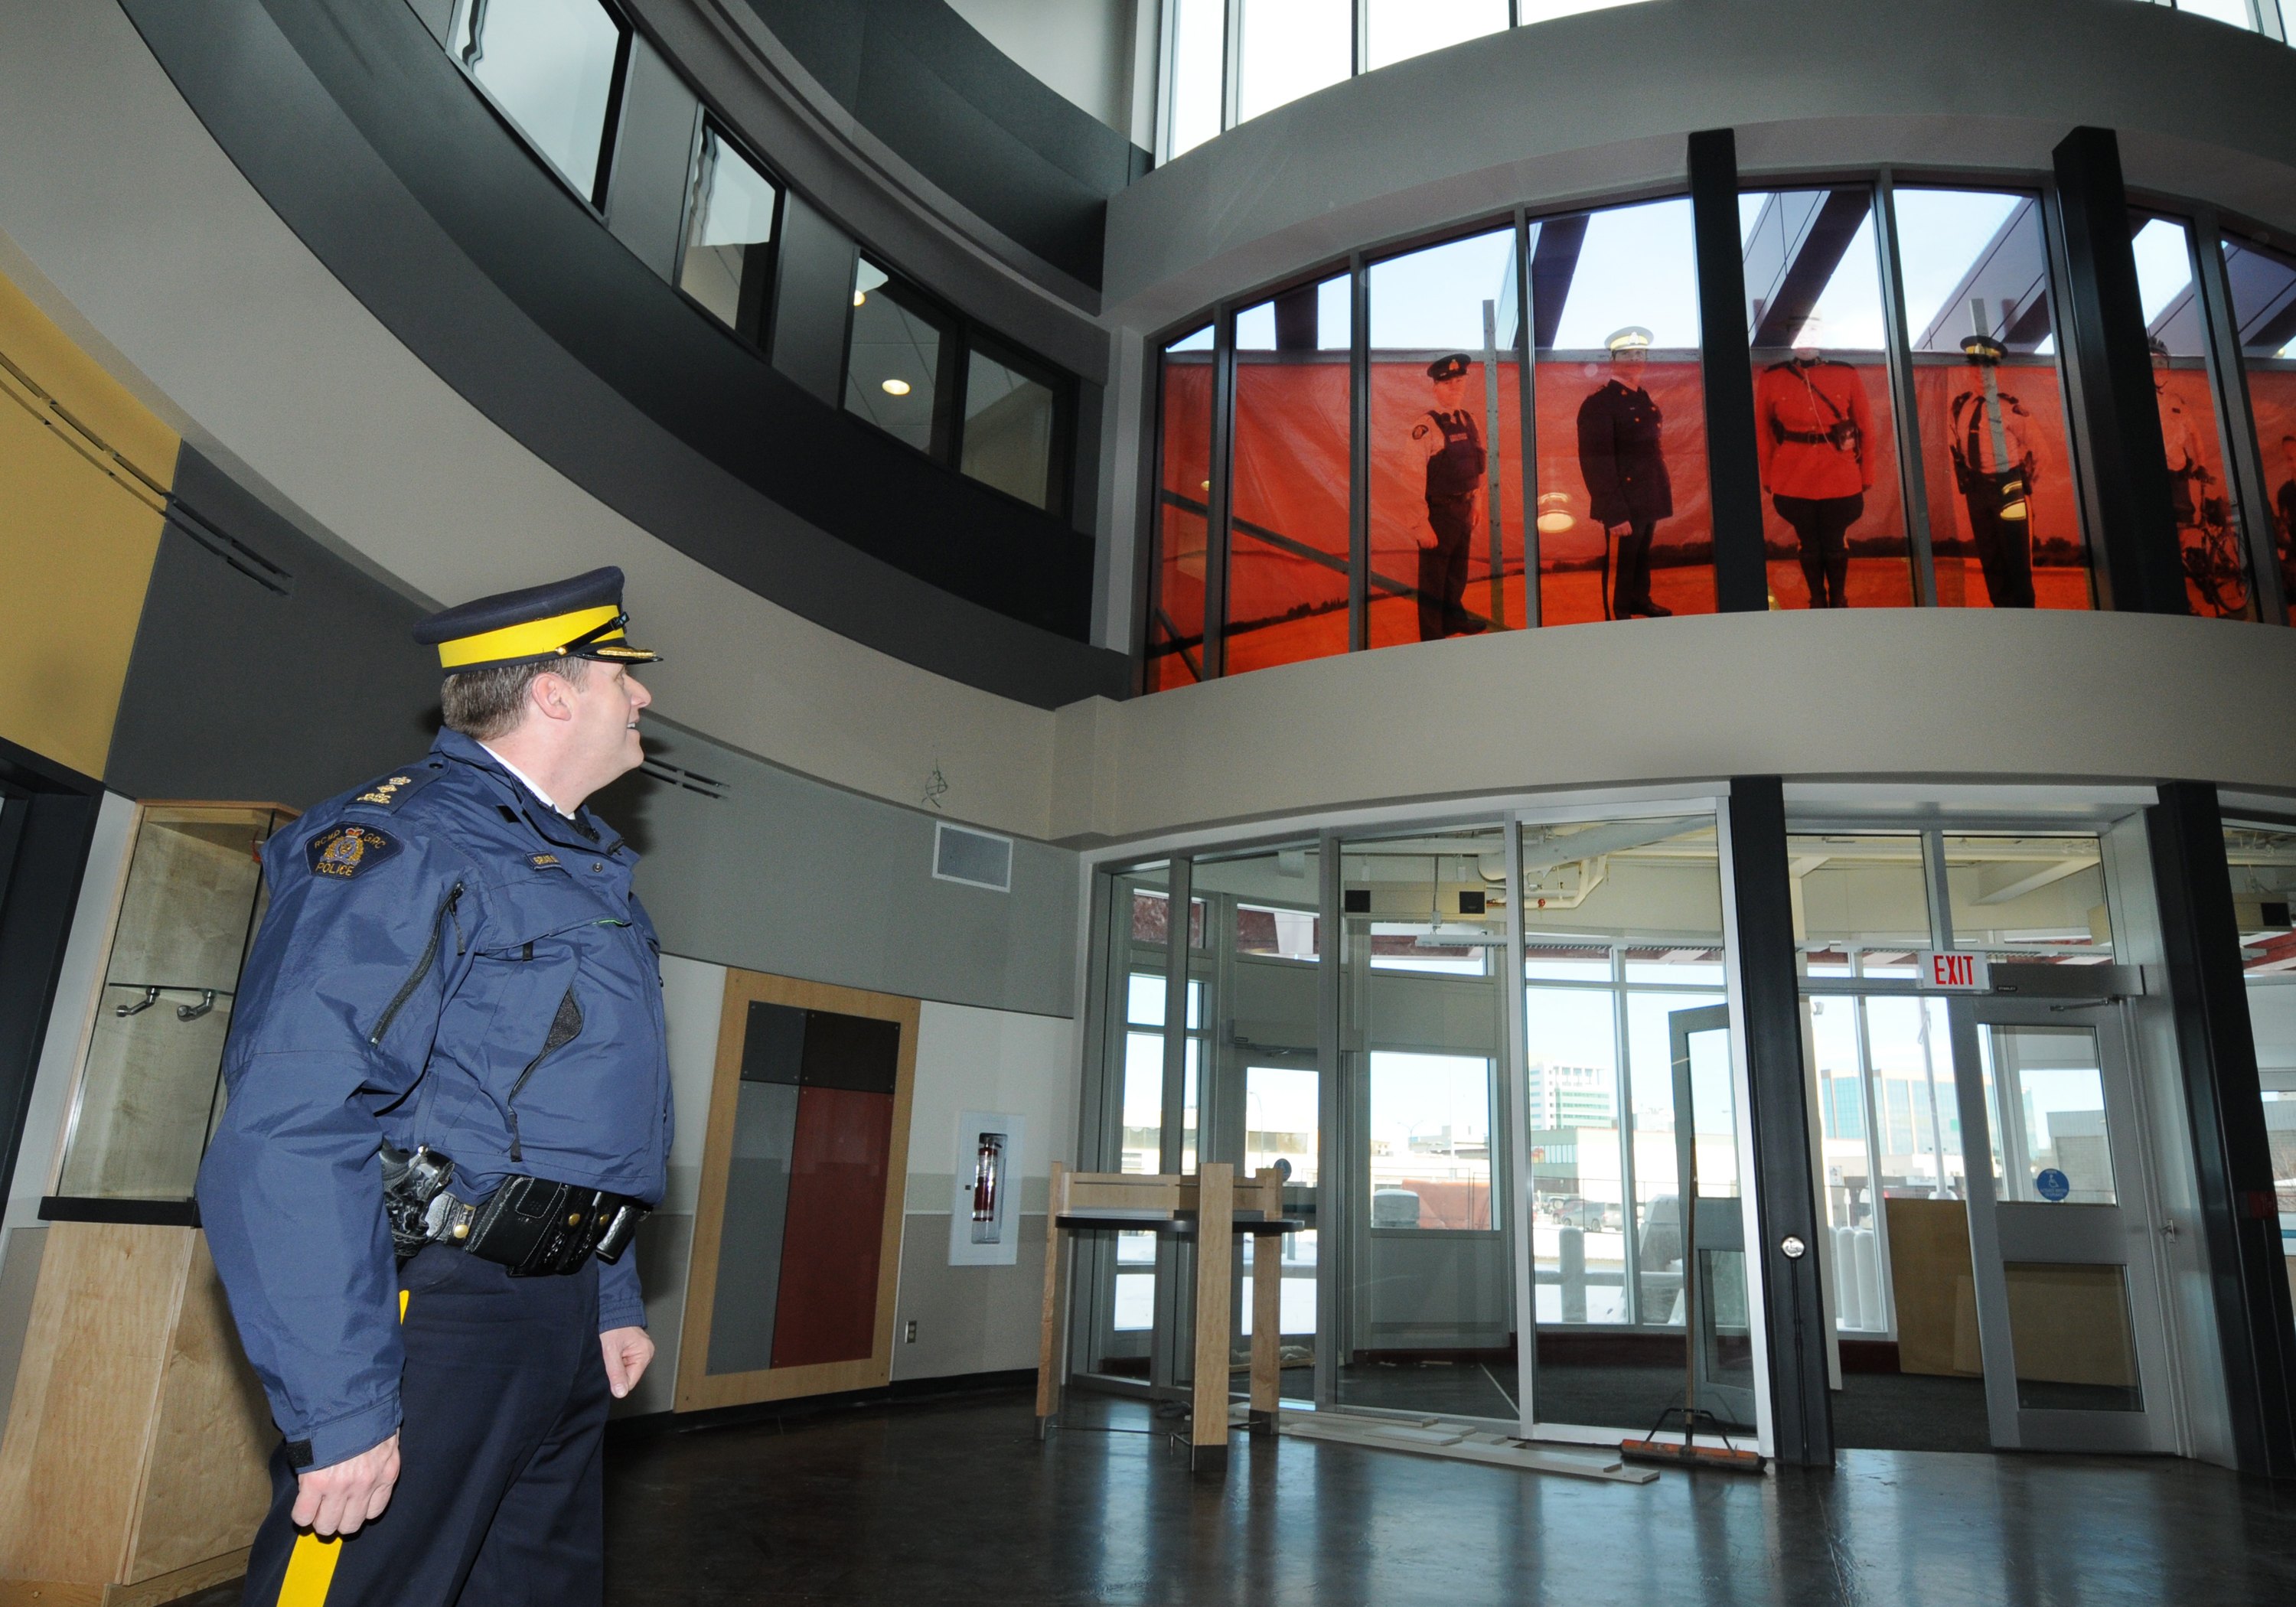 GREAT VIEW - Red Deer city RCMP Supt. Brian Simpson looks over the front entry area of the new $30 million police station downtown.